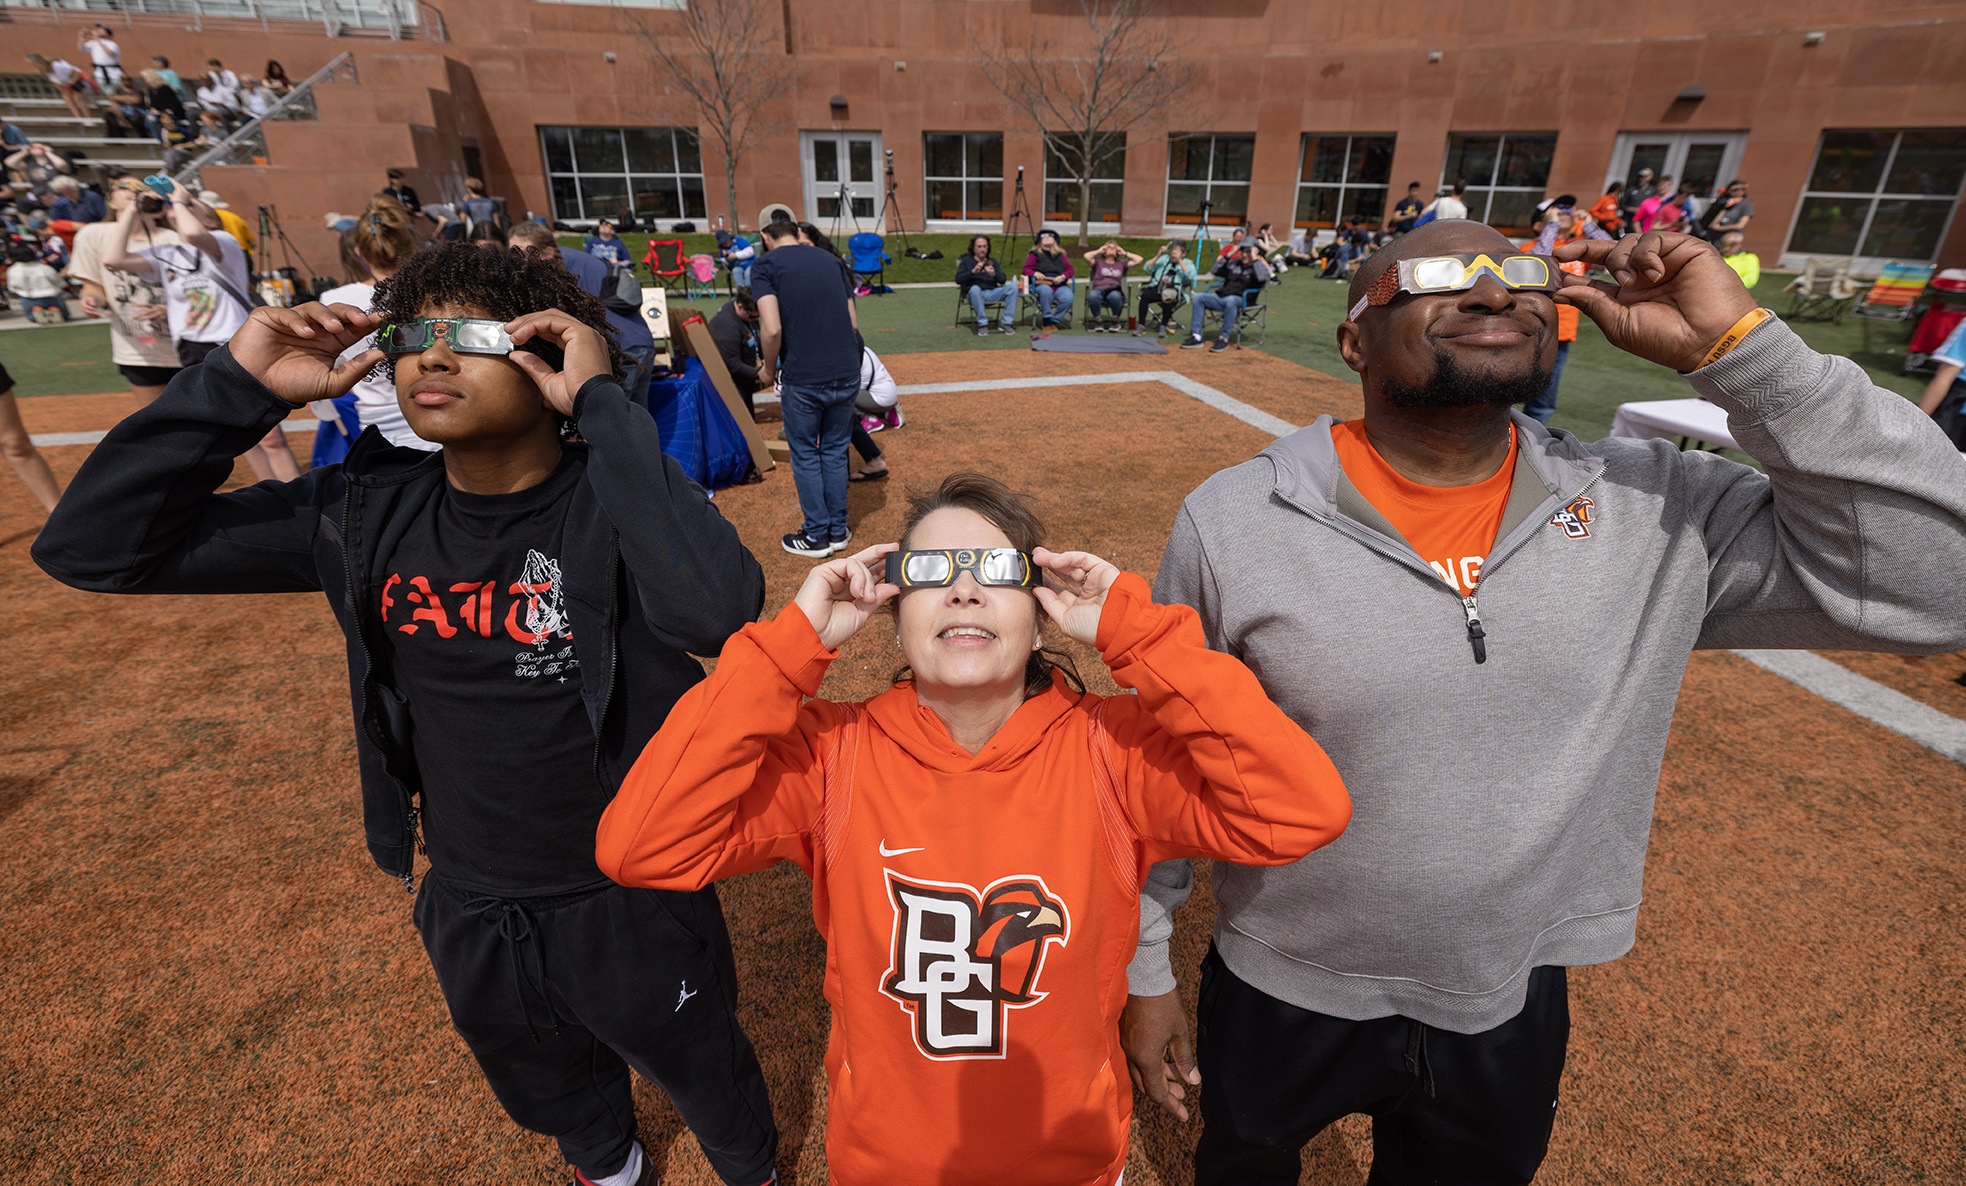 People wearing eclipse glasses sit on a football field